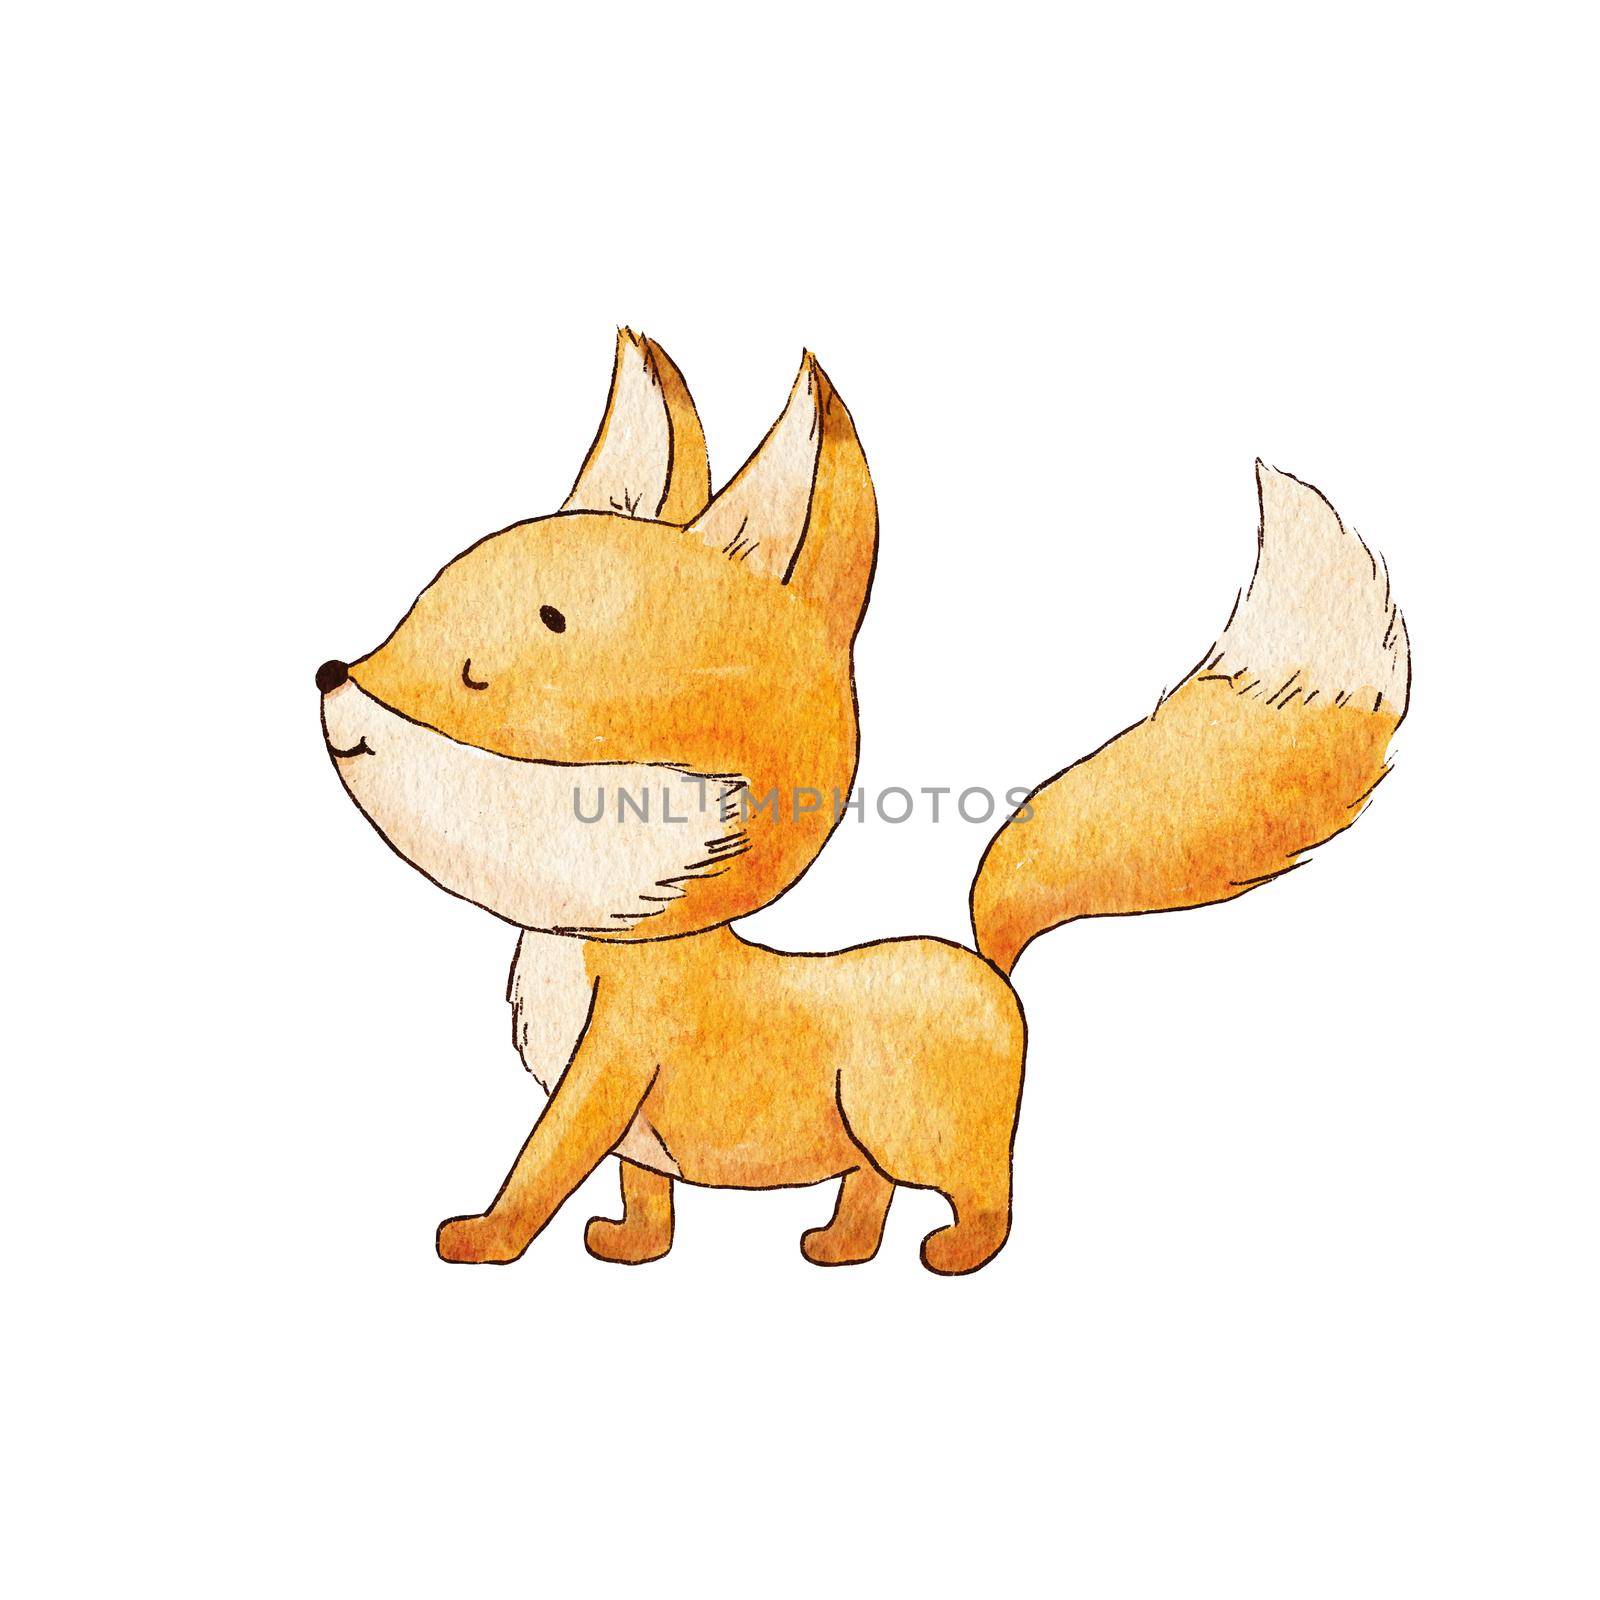 Cute baby fox going. Watercolor childish illustration isolated on white. Woodland little animal